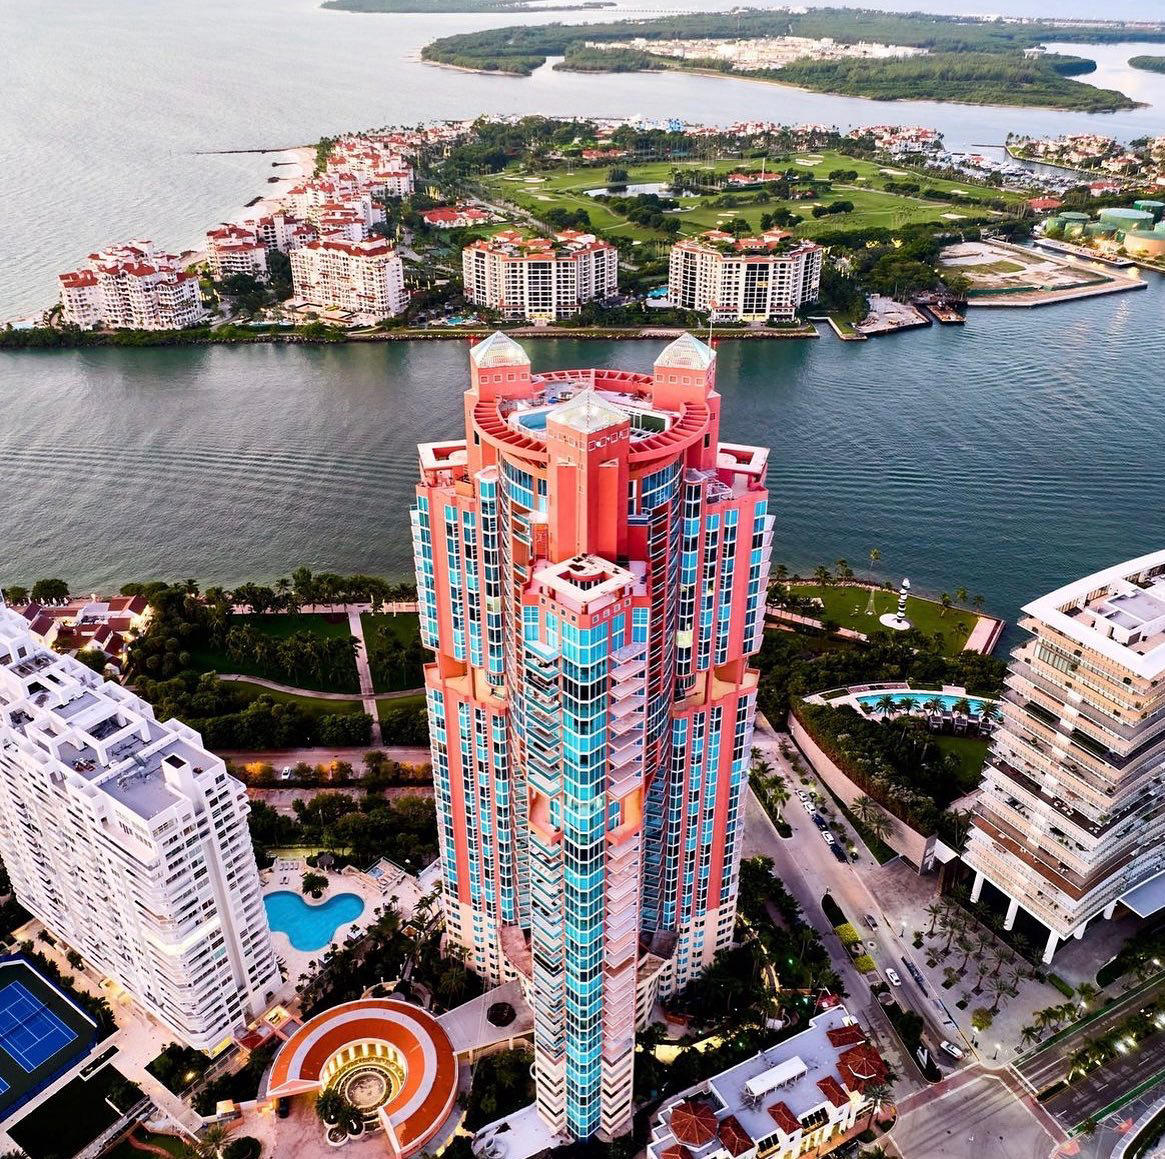 Miami - The Portofino is one of the most recognizable and iconic buildings on Miami Beach